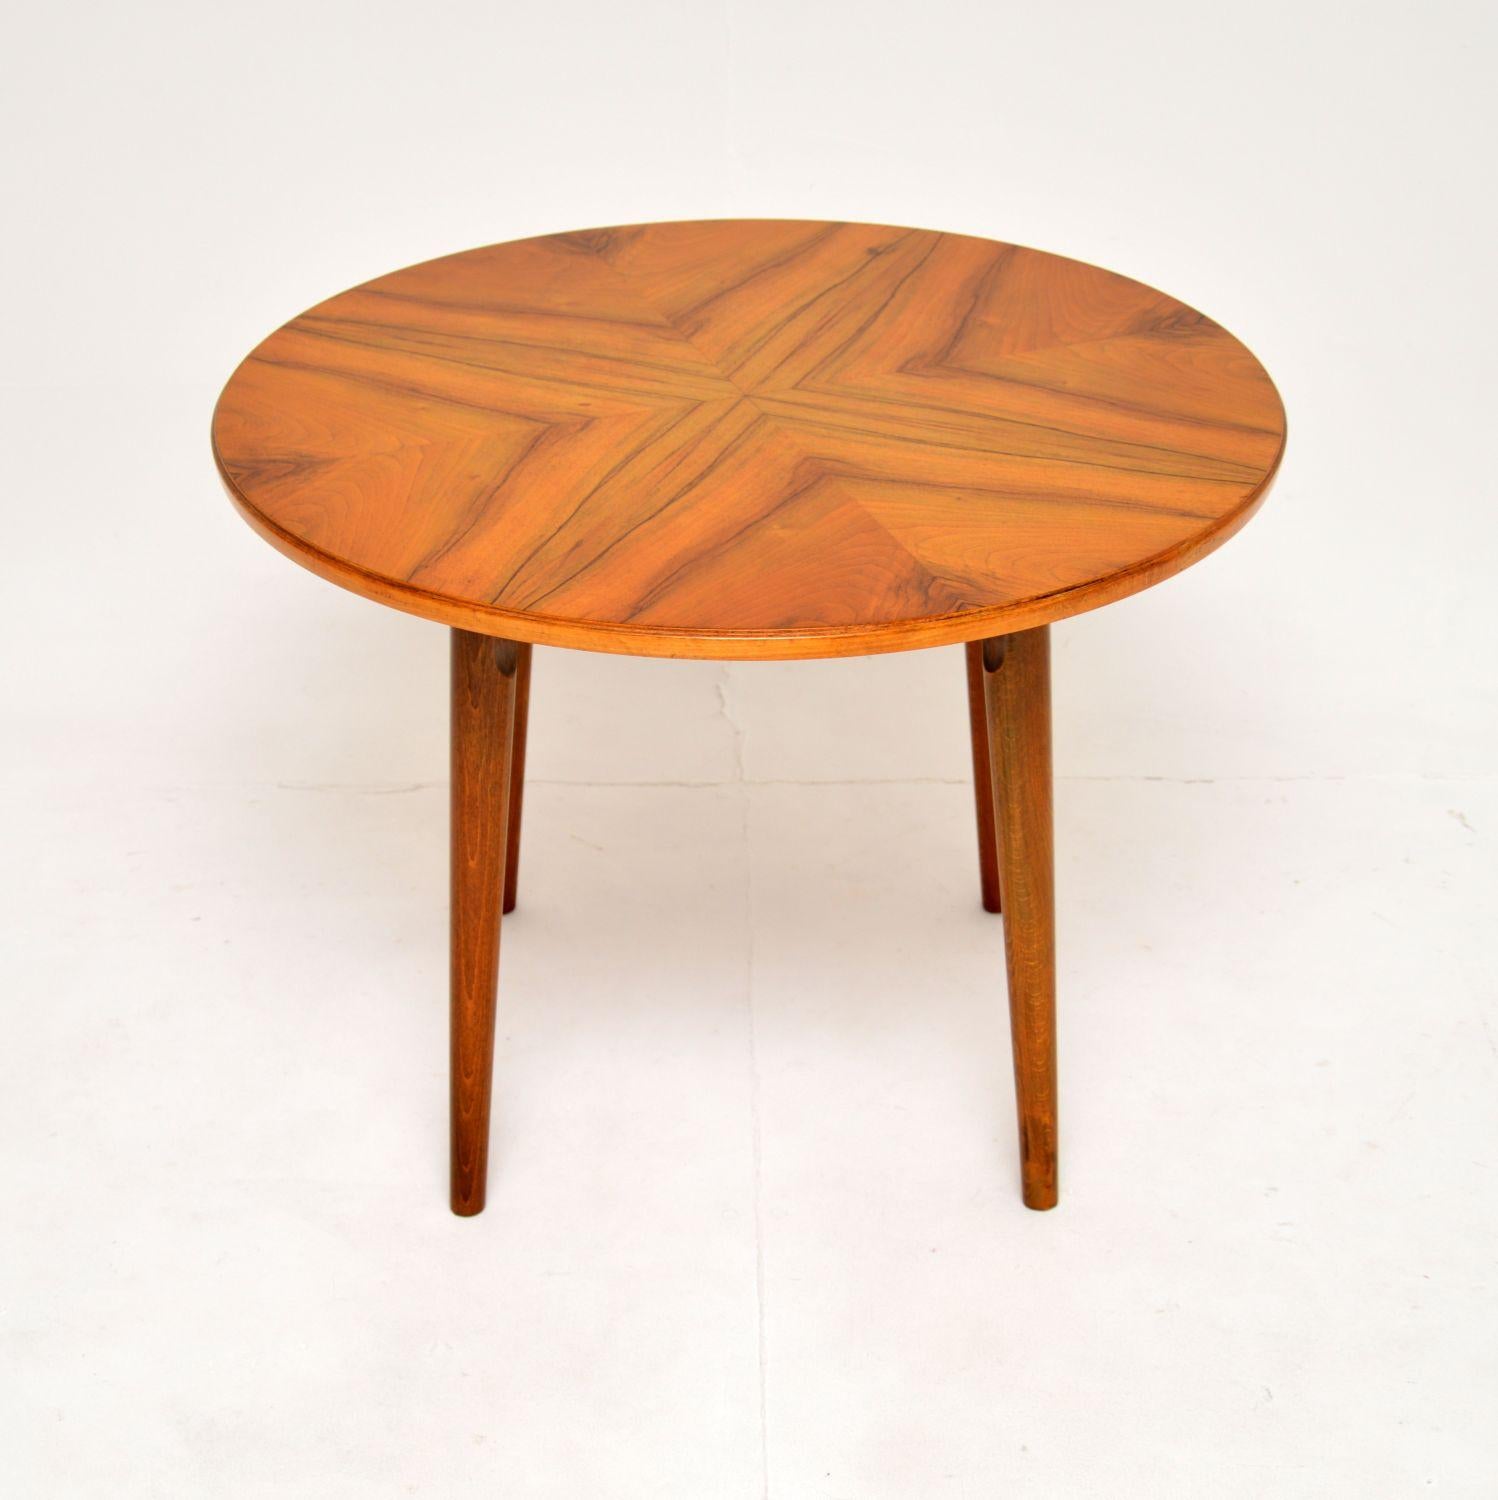 A stylish and very well made vintage coffee / side table in walnut. This was made in England, it dates from around the 1950’s.

It is of lovely quality and is a very useful size, perfect for use as either a main coffee table or an occasional side